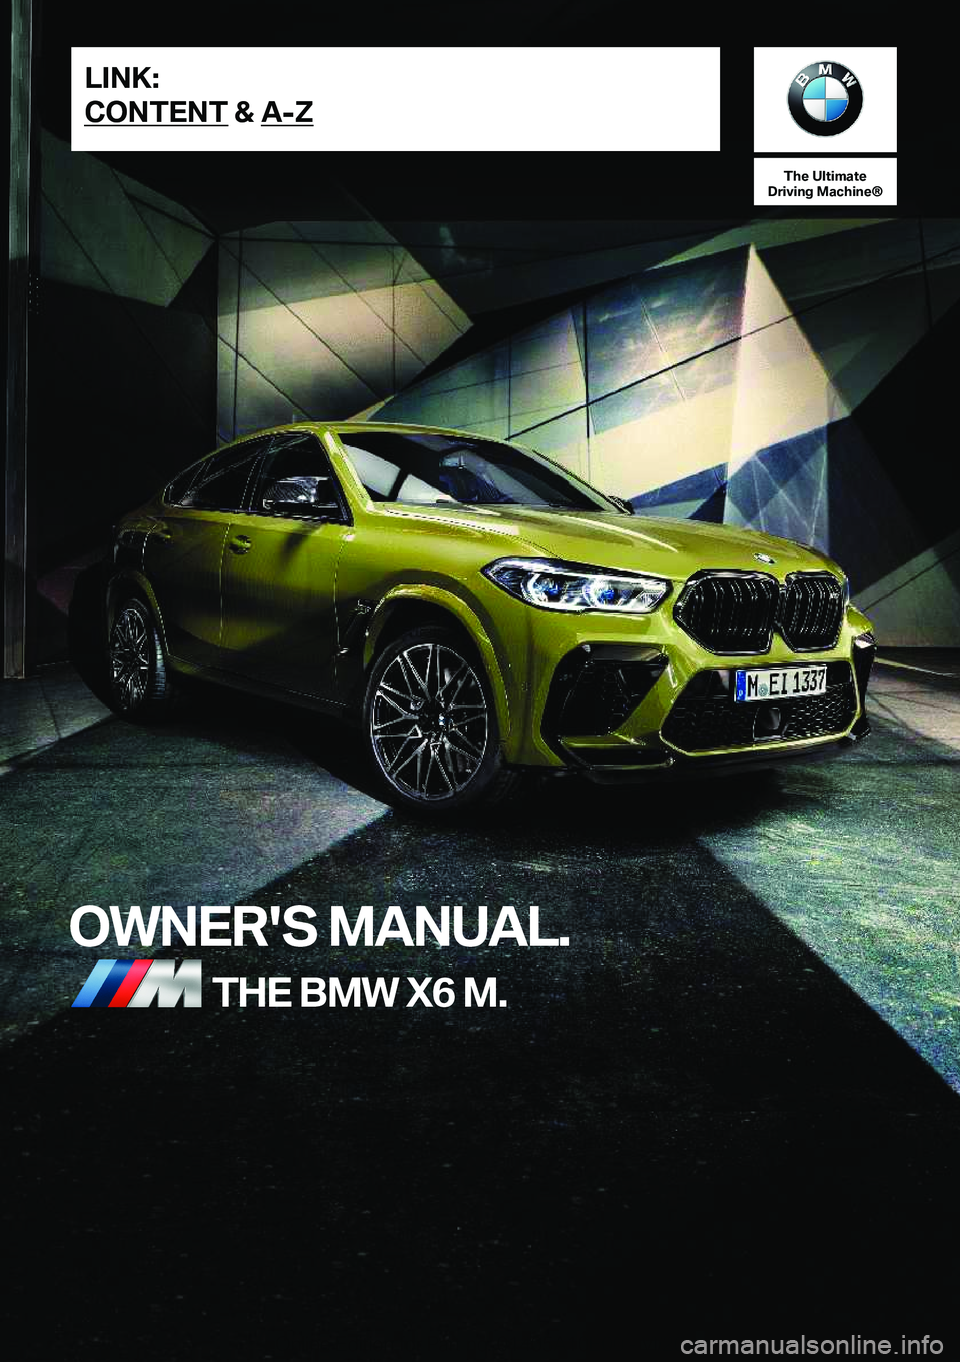 BMW X6 M 2021  Owners Manual �T�h�e��U�l�t�i�m�a�t�e
�D�r�i�v�i�n�g��M�a�c�h�i�n�e�n
�O�W�N�E�R�'�S��M�A�N�U�A�L�.�T�H�E��B�M�W��X�6��M�.�L�I�N�K�:
�C�O�N�T�E�N�T��&��A�-�Z�O�n�l�i�n�e��E�d�i�t�i�o�n��f�o�r��P�a�r�